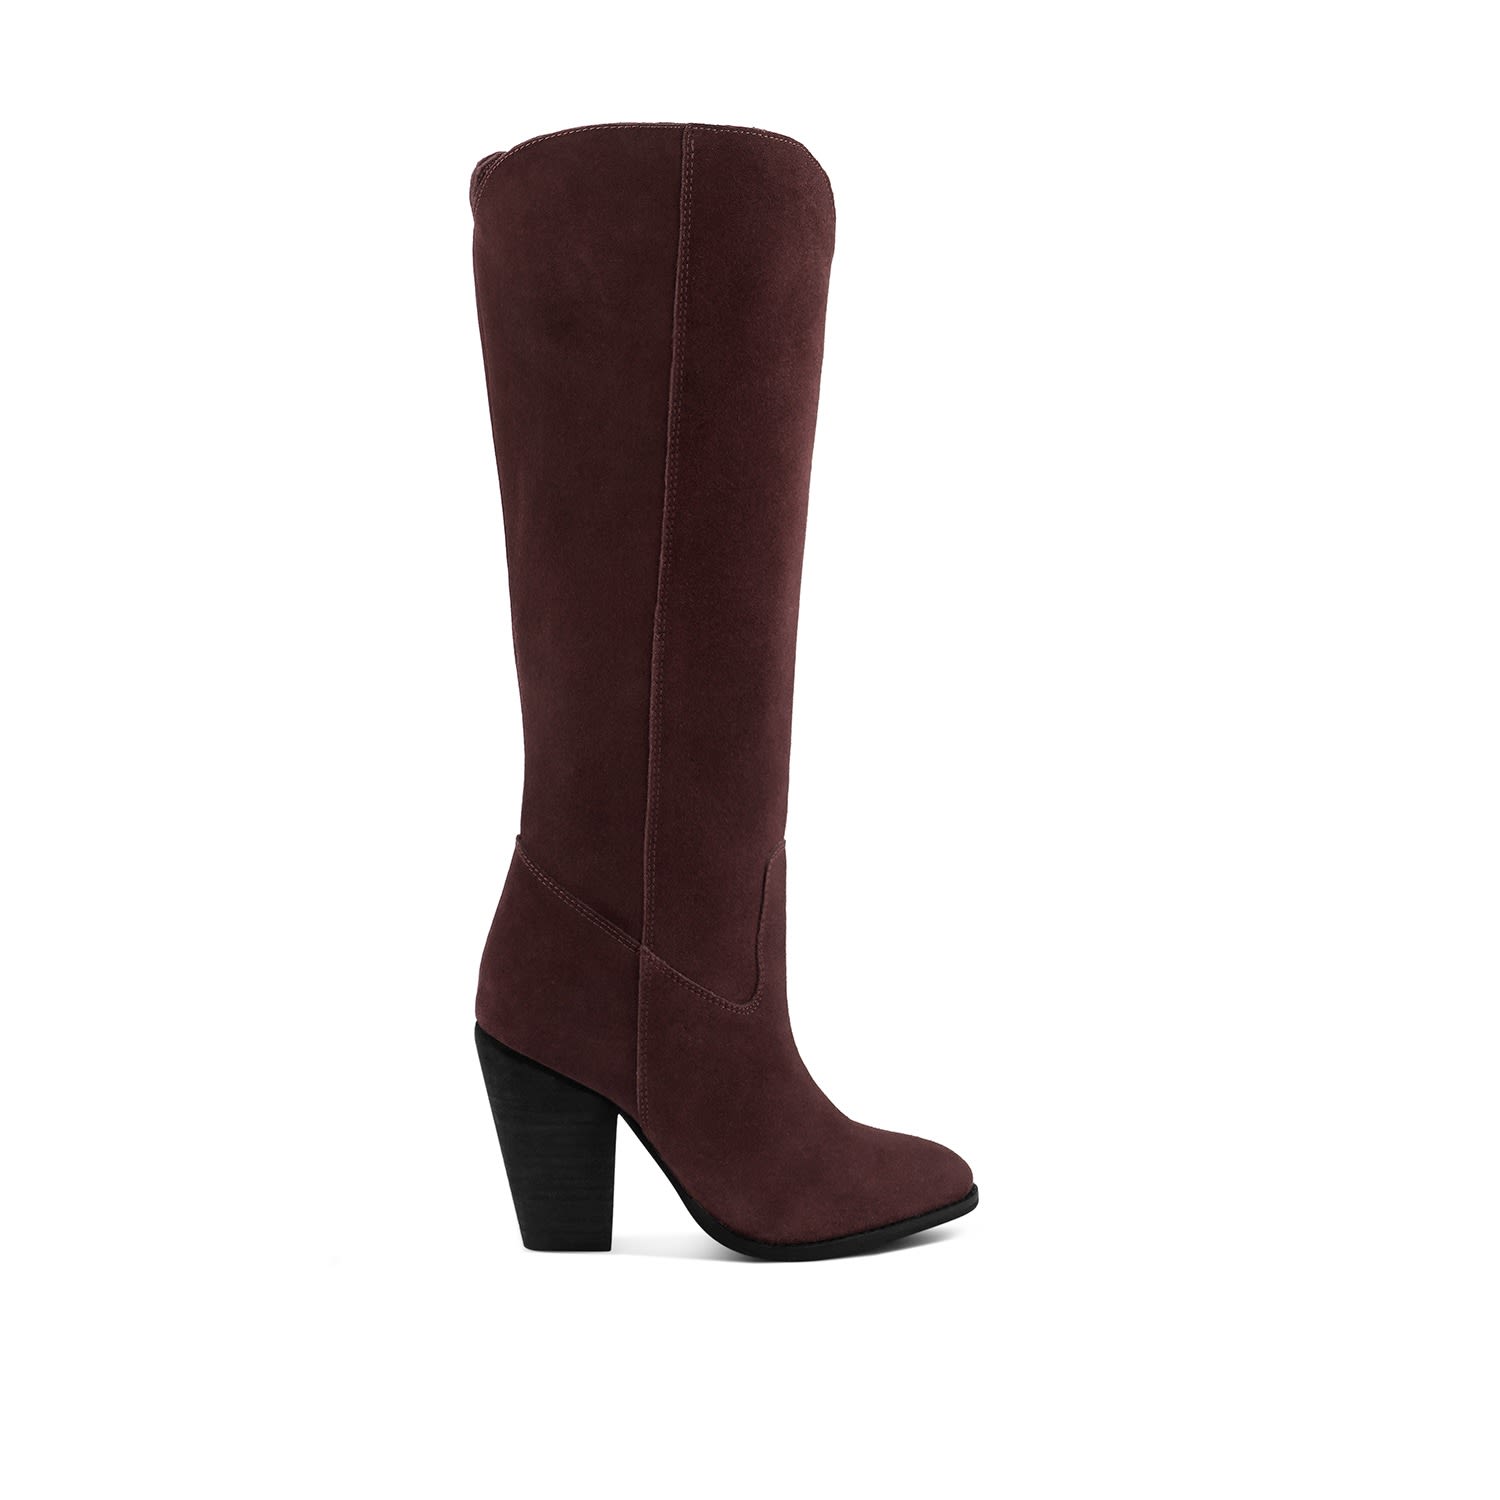 Shop Rag & Co Women's Red Great-storm Burgundy Suede Leather Calf Boots